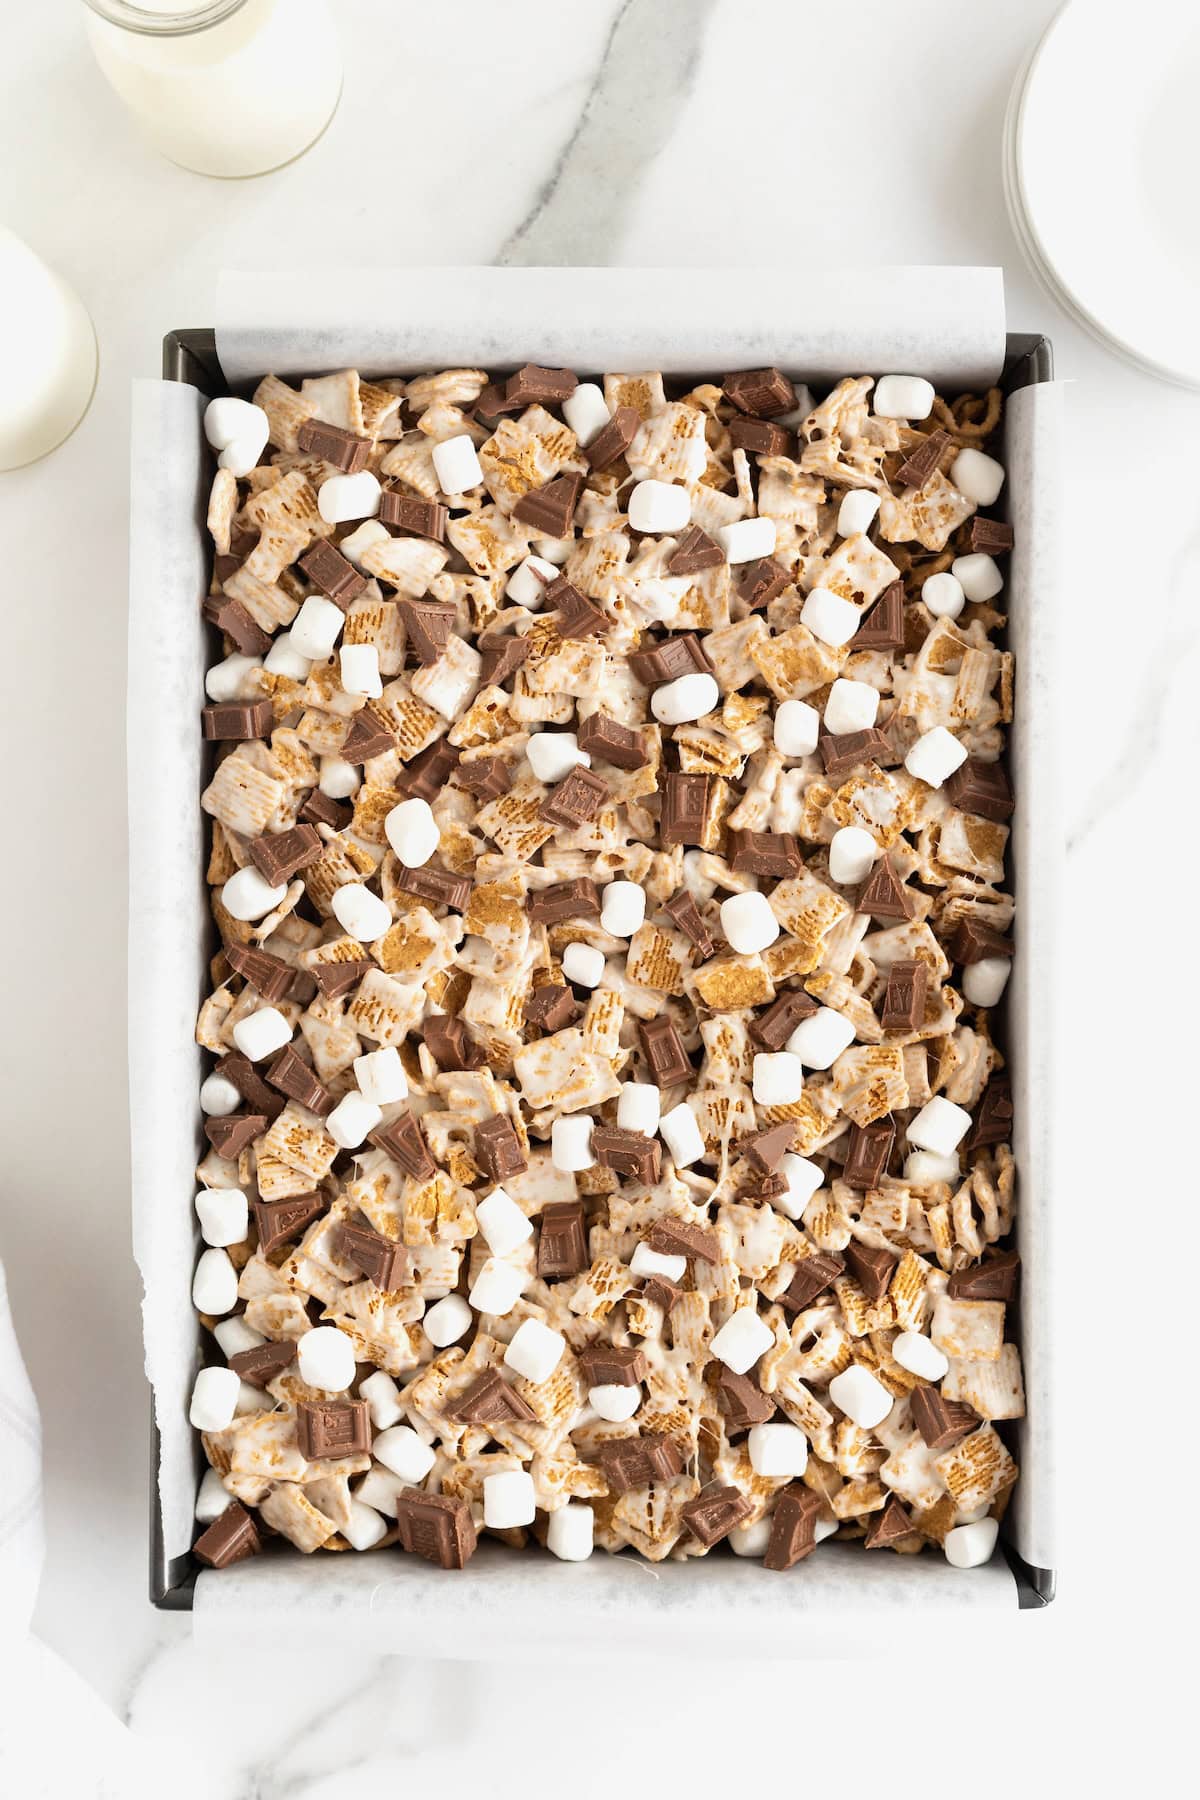 A parchment-lined baking pan of no-bake s'mores treats.